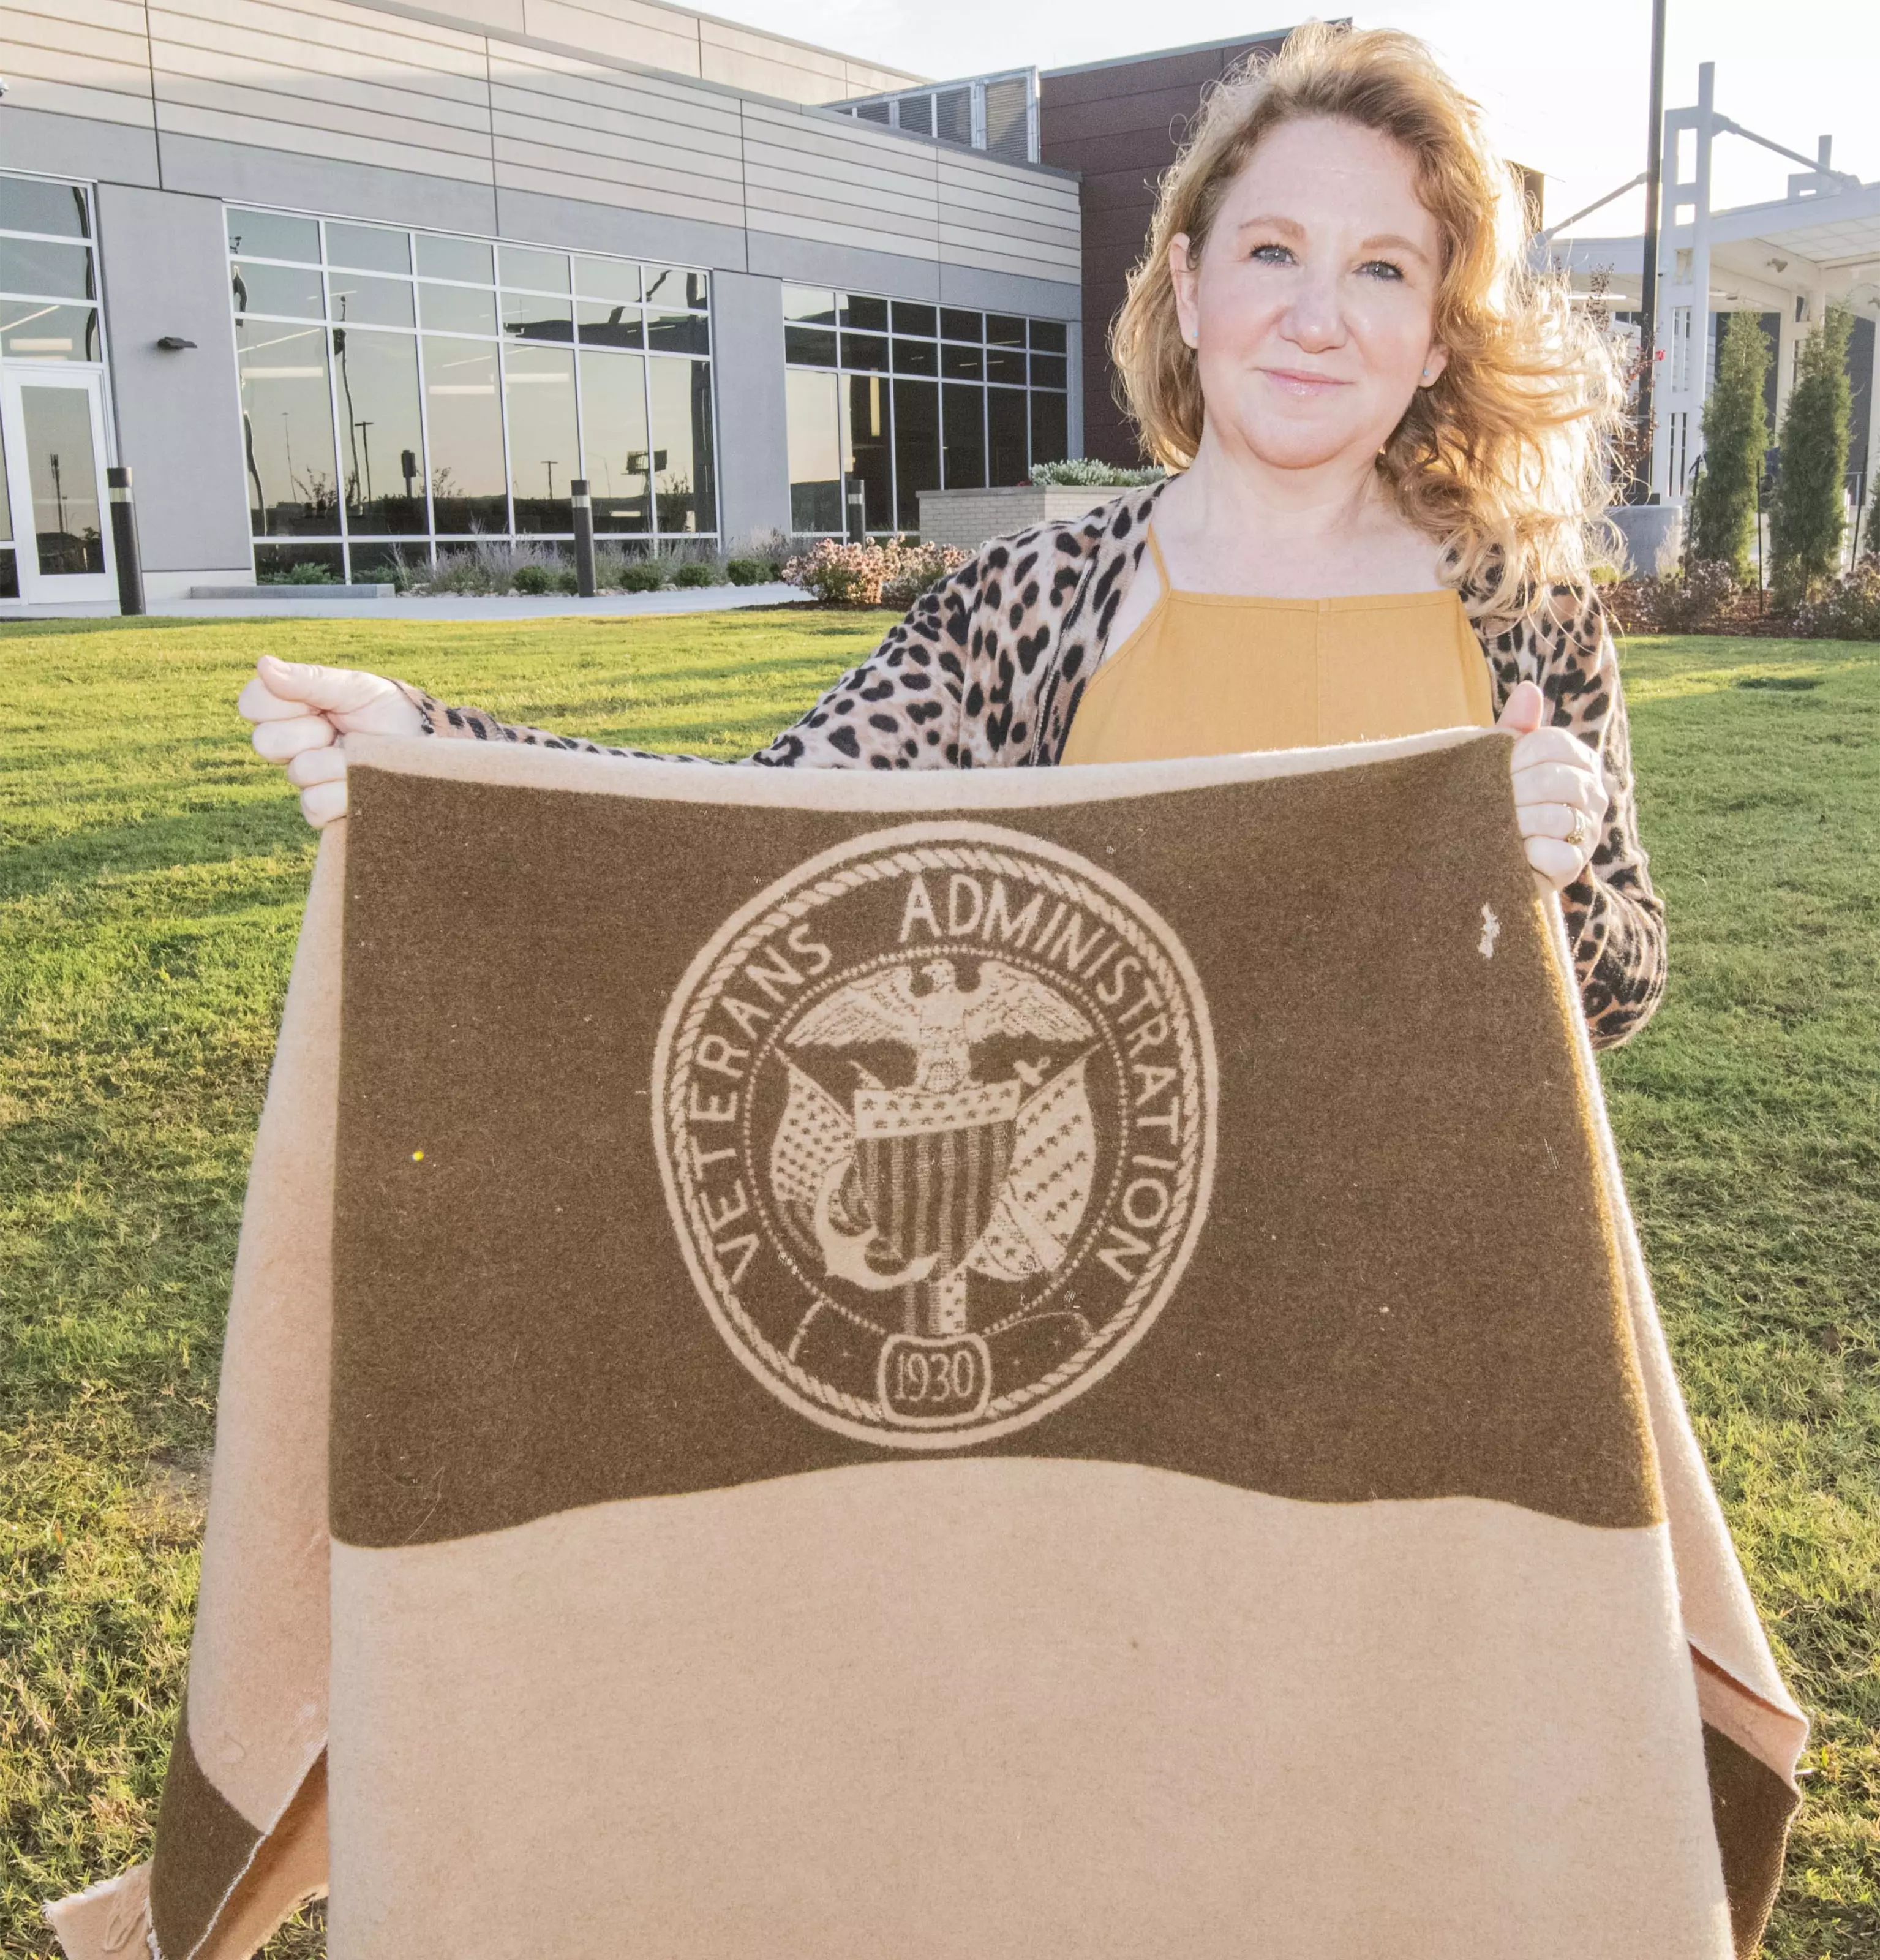 VA Psychologist Arena Mueller holds a 1930 Veterans Administration blanket she donated to the National VA History Center. Photo taken at the Ernest Childers VA Outpatient Clinic in Tulsa, Oklahoma. (VA Photo)